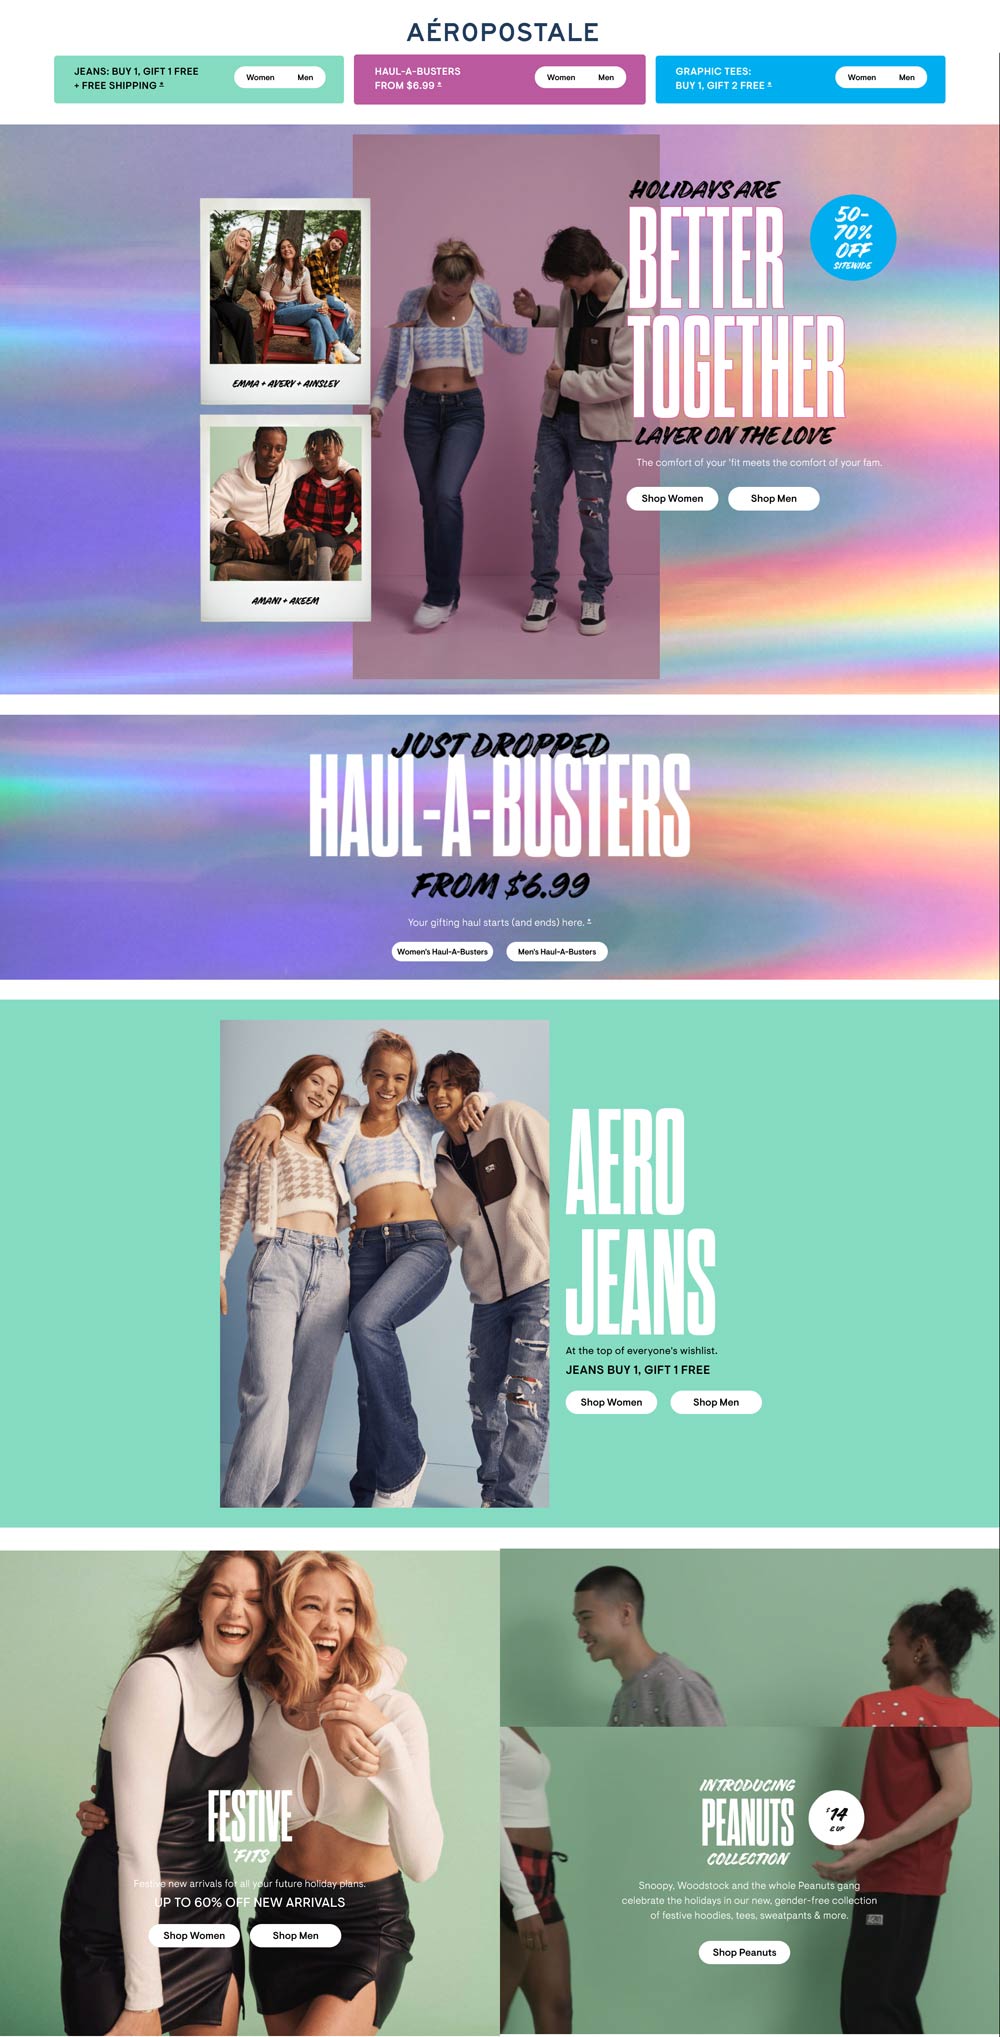 Aeropostale coupons & promo code for [November 2022]